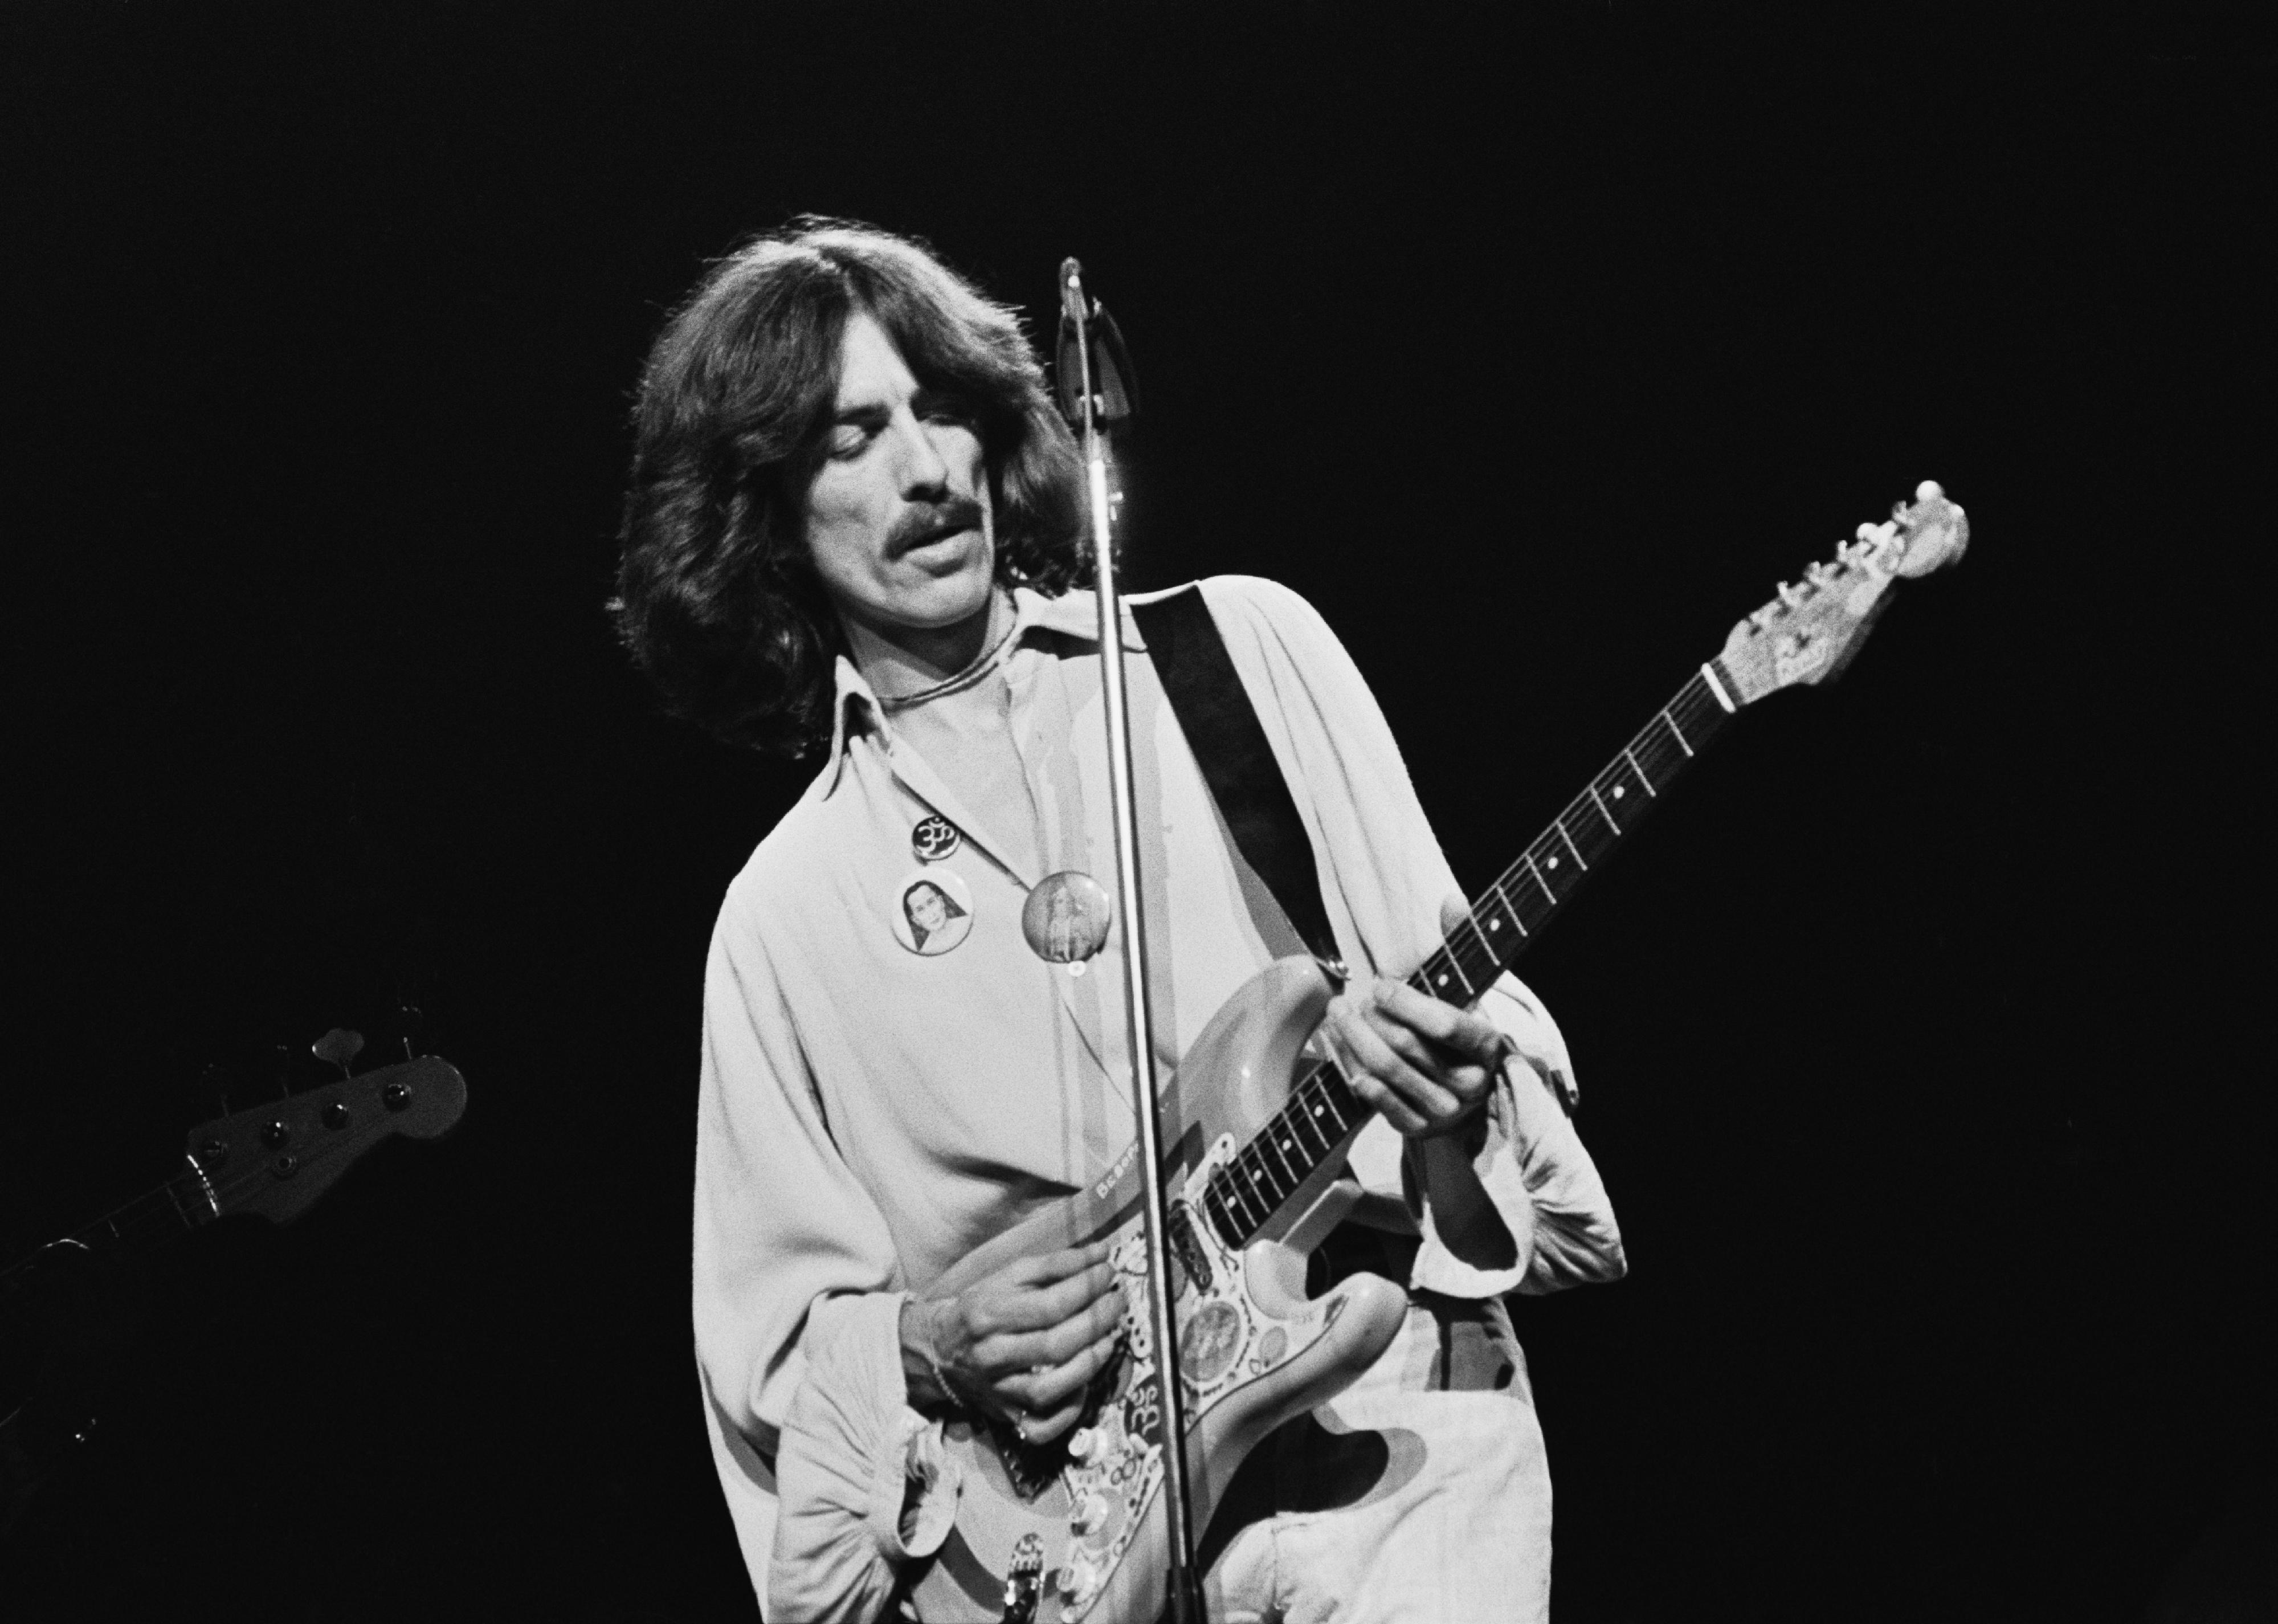 George Harrison performing on stage playing his 